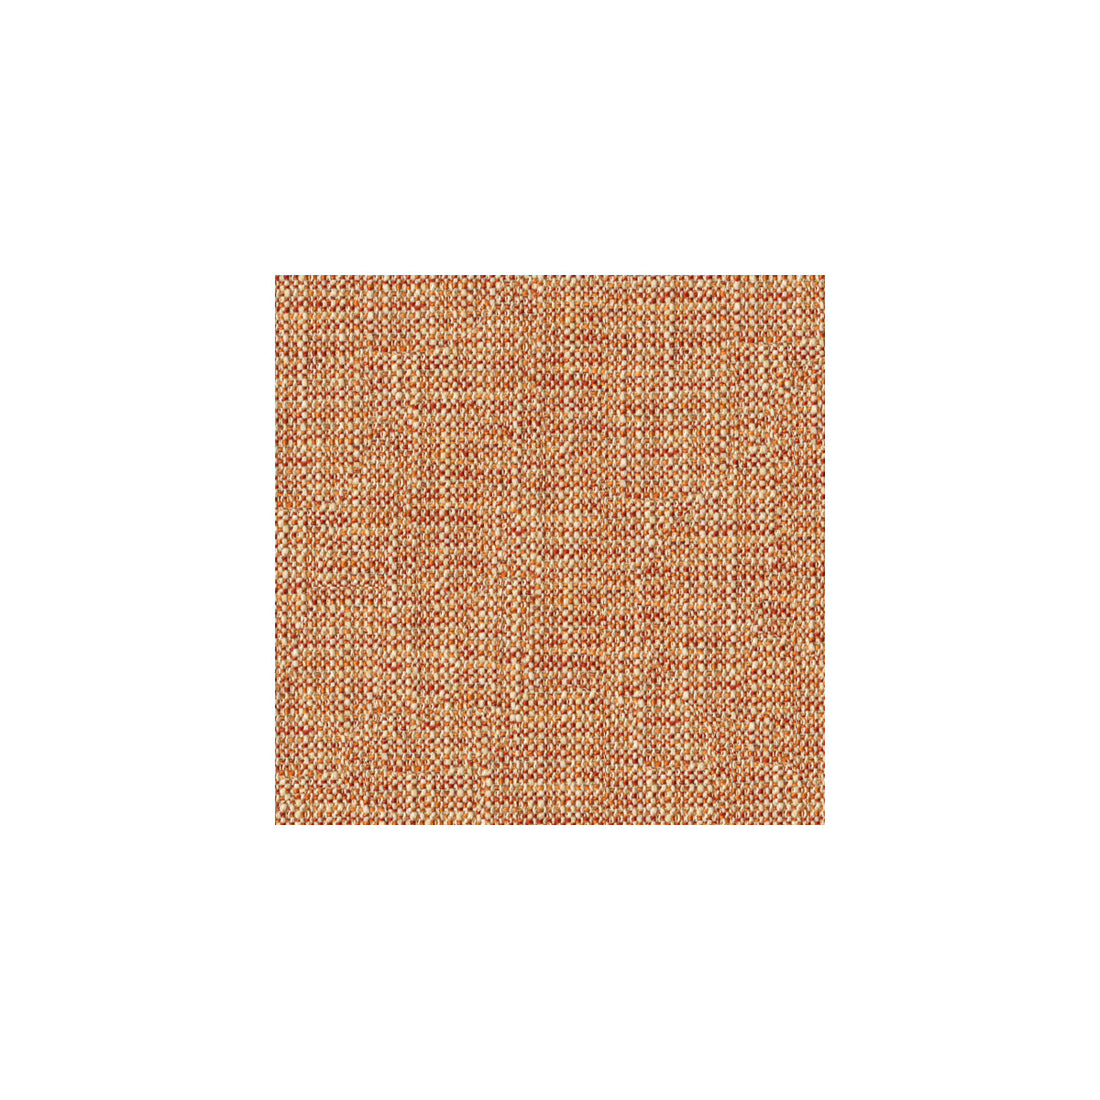 Lamson fabric in coral color - pattern 32792.19.0 - by Kravet Basics in the Thom Filicia collection